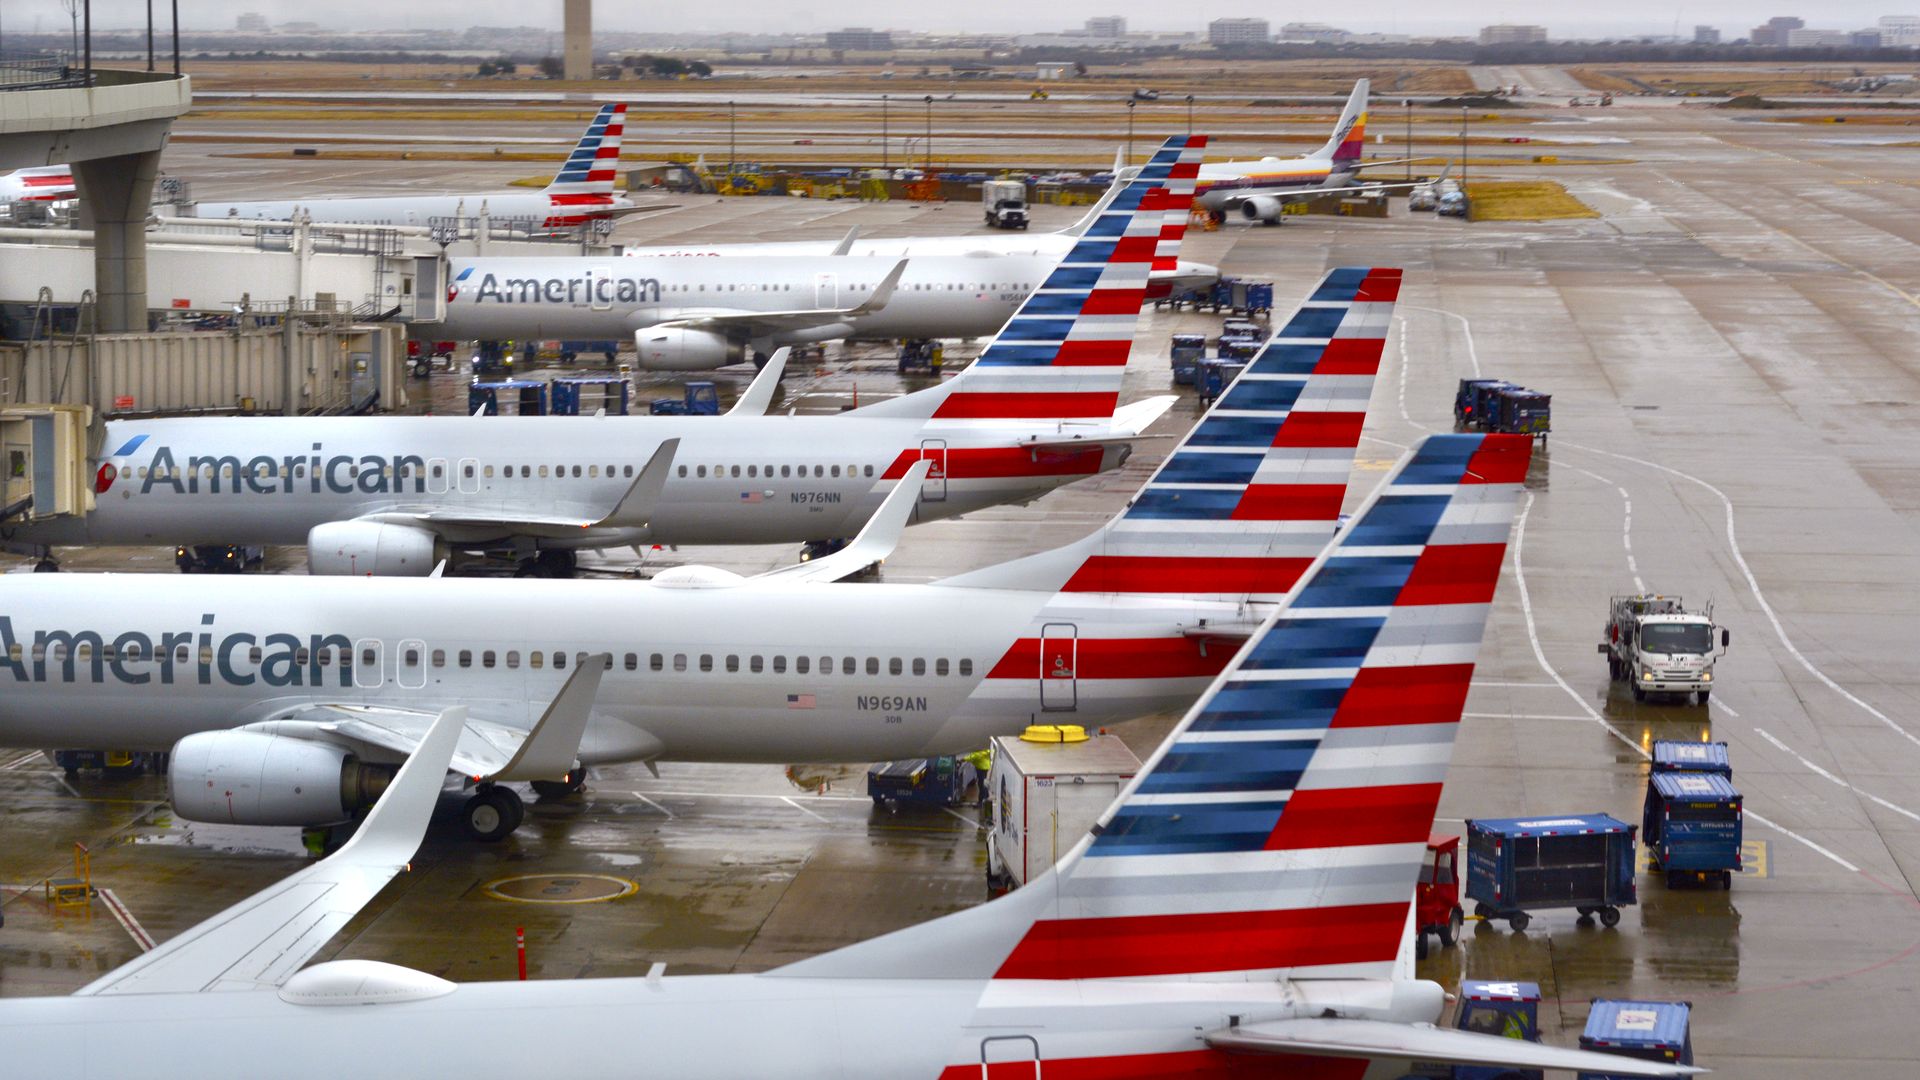 American Airlines planes parked at the gate of an airport.